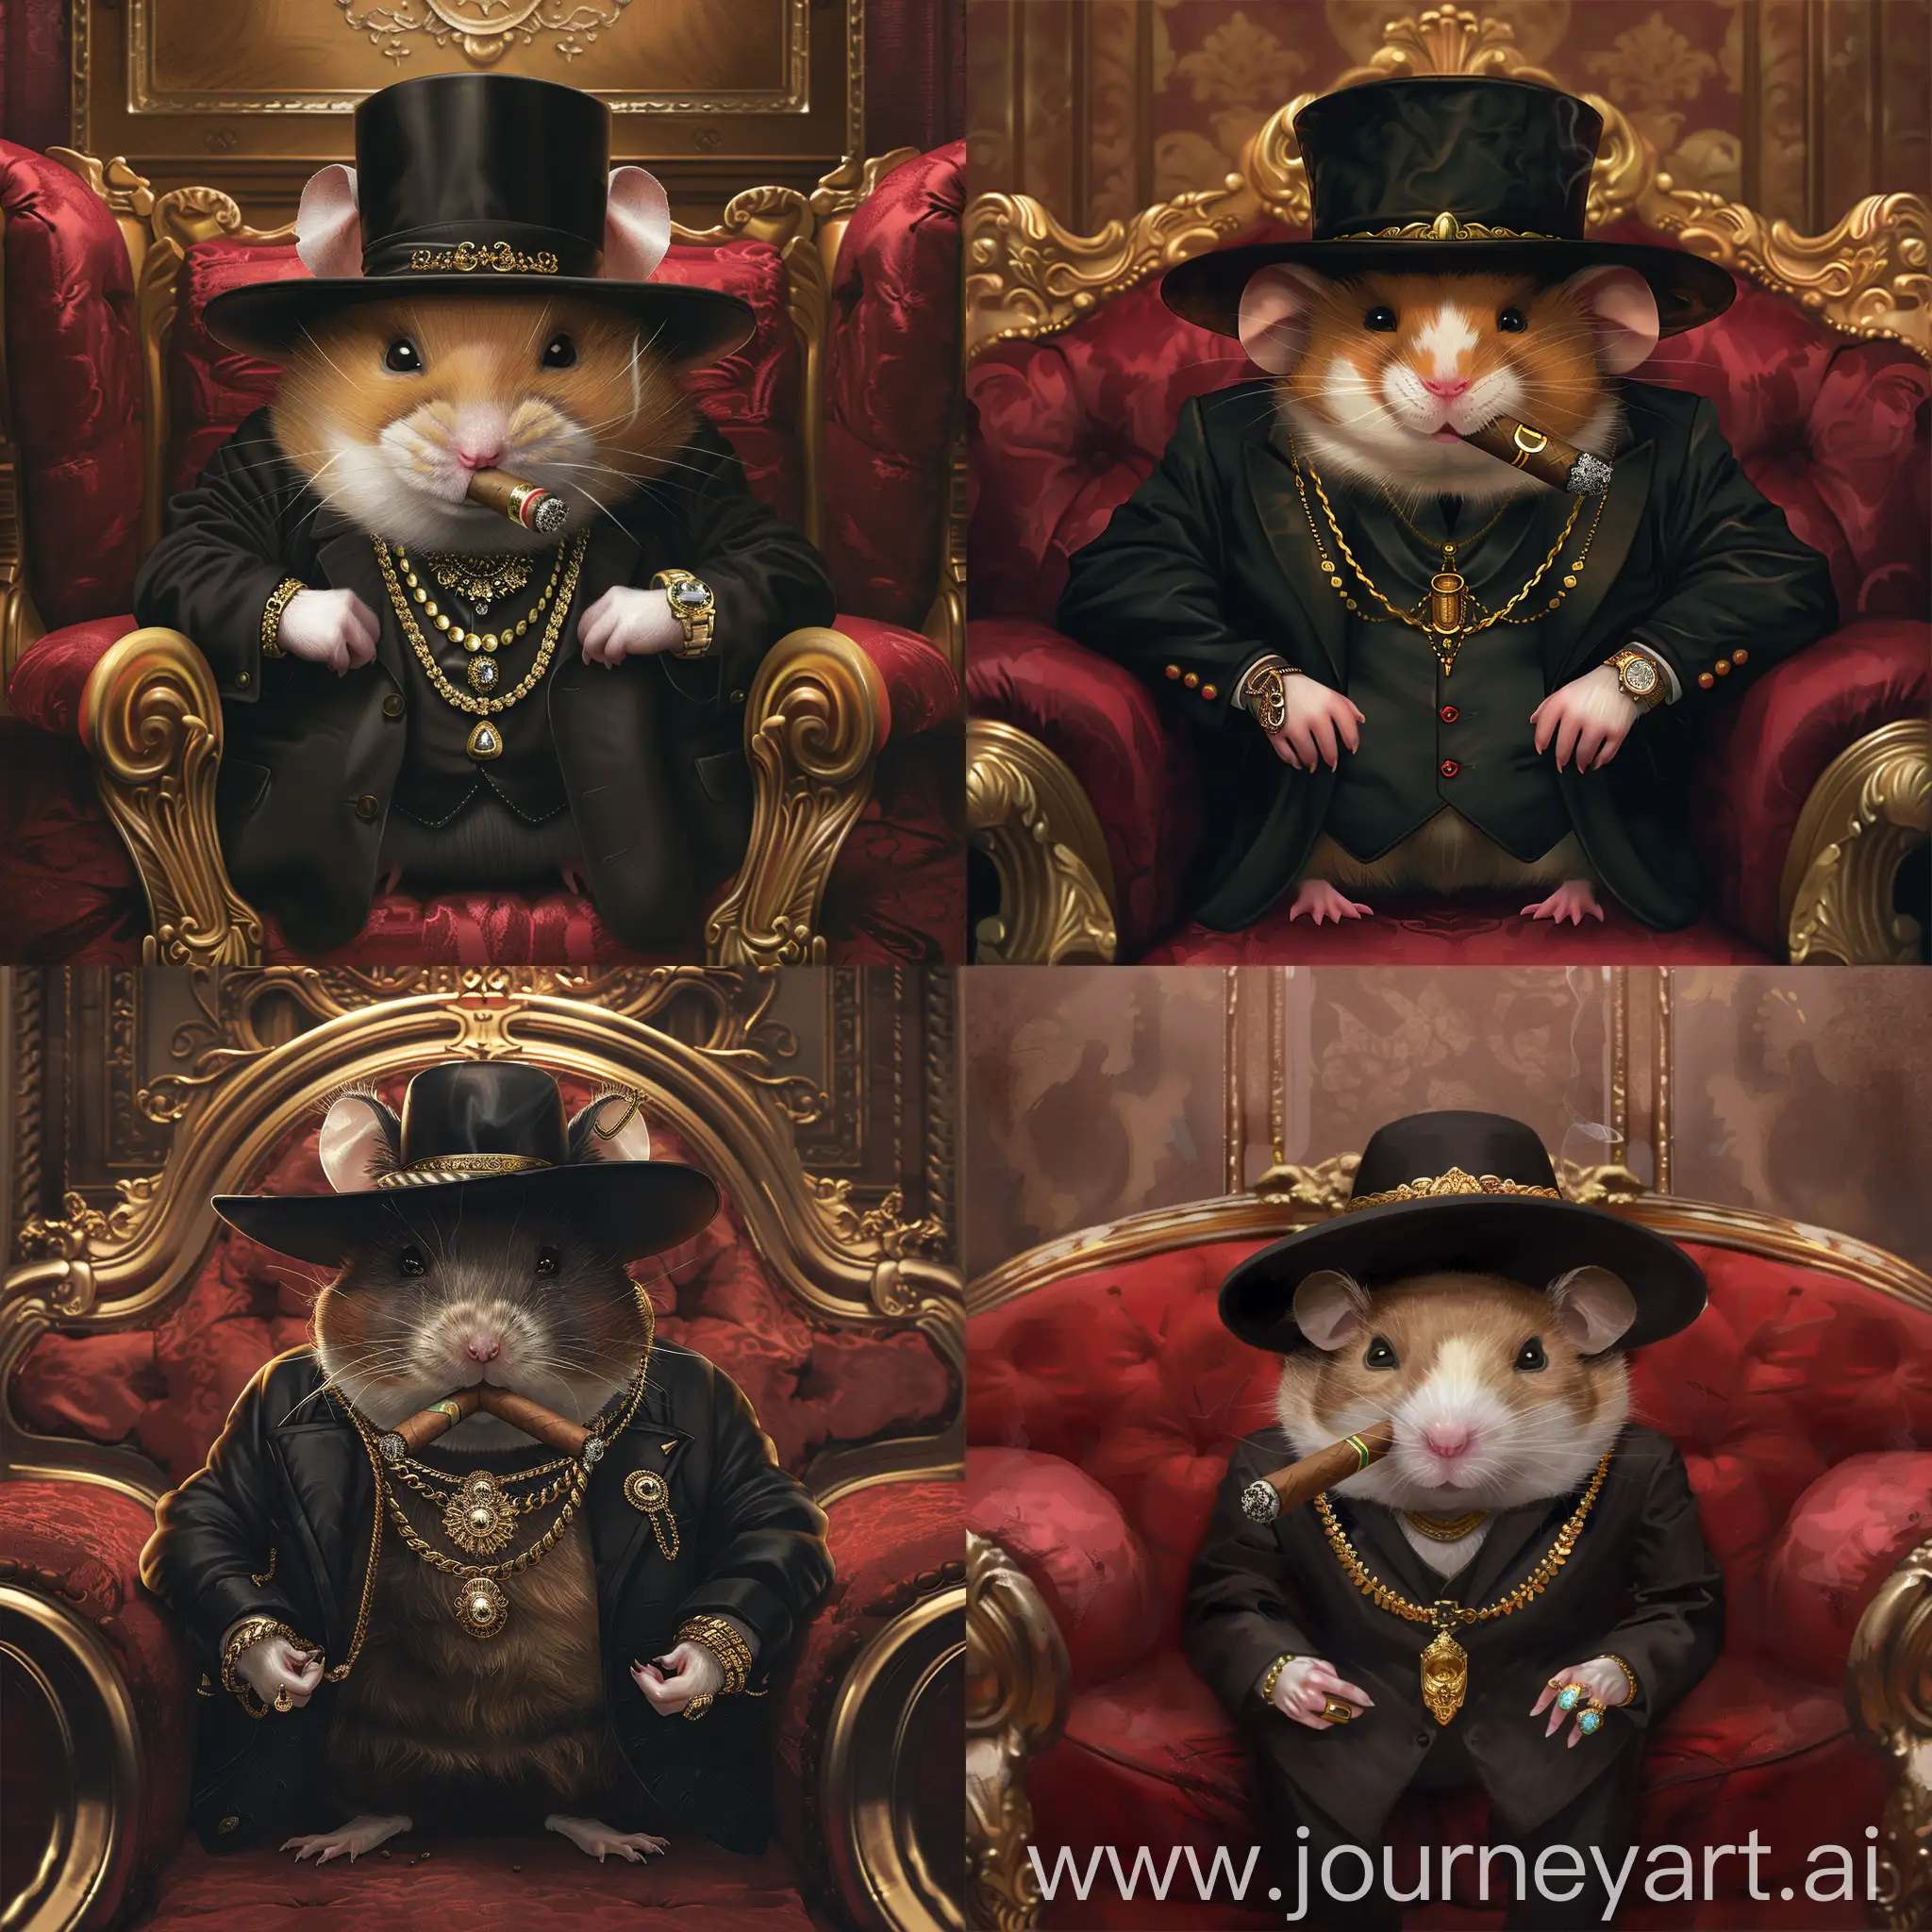 "A wealthy cute hamster in a black suit and hat, with a large cigar leaf on his lips, a large gold necklace around his neck, and several expensive rings on his fingers, sitting on a luxurious red sofa, placing his hands on the sofa arms, staring into the camera, draw it for me."